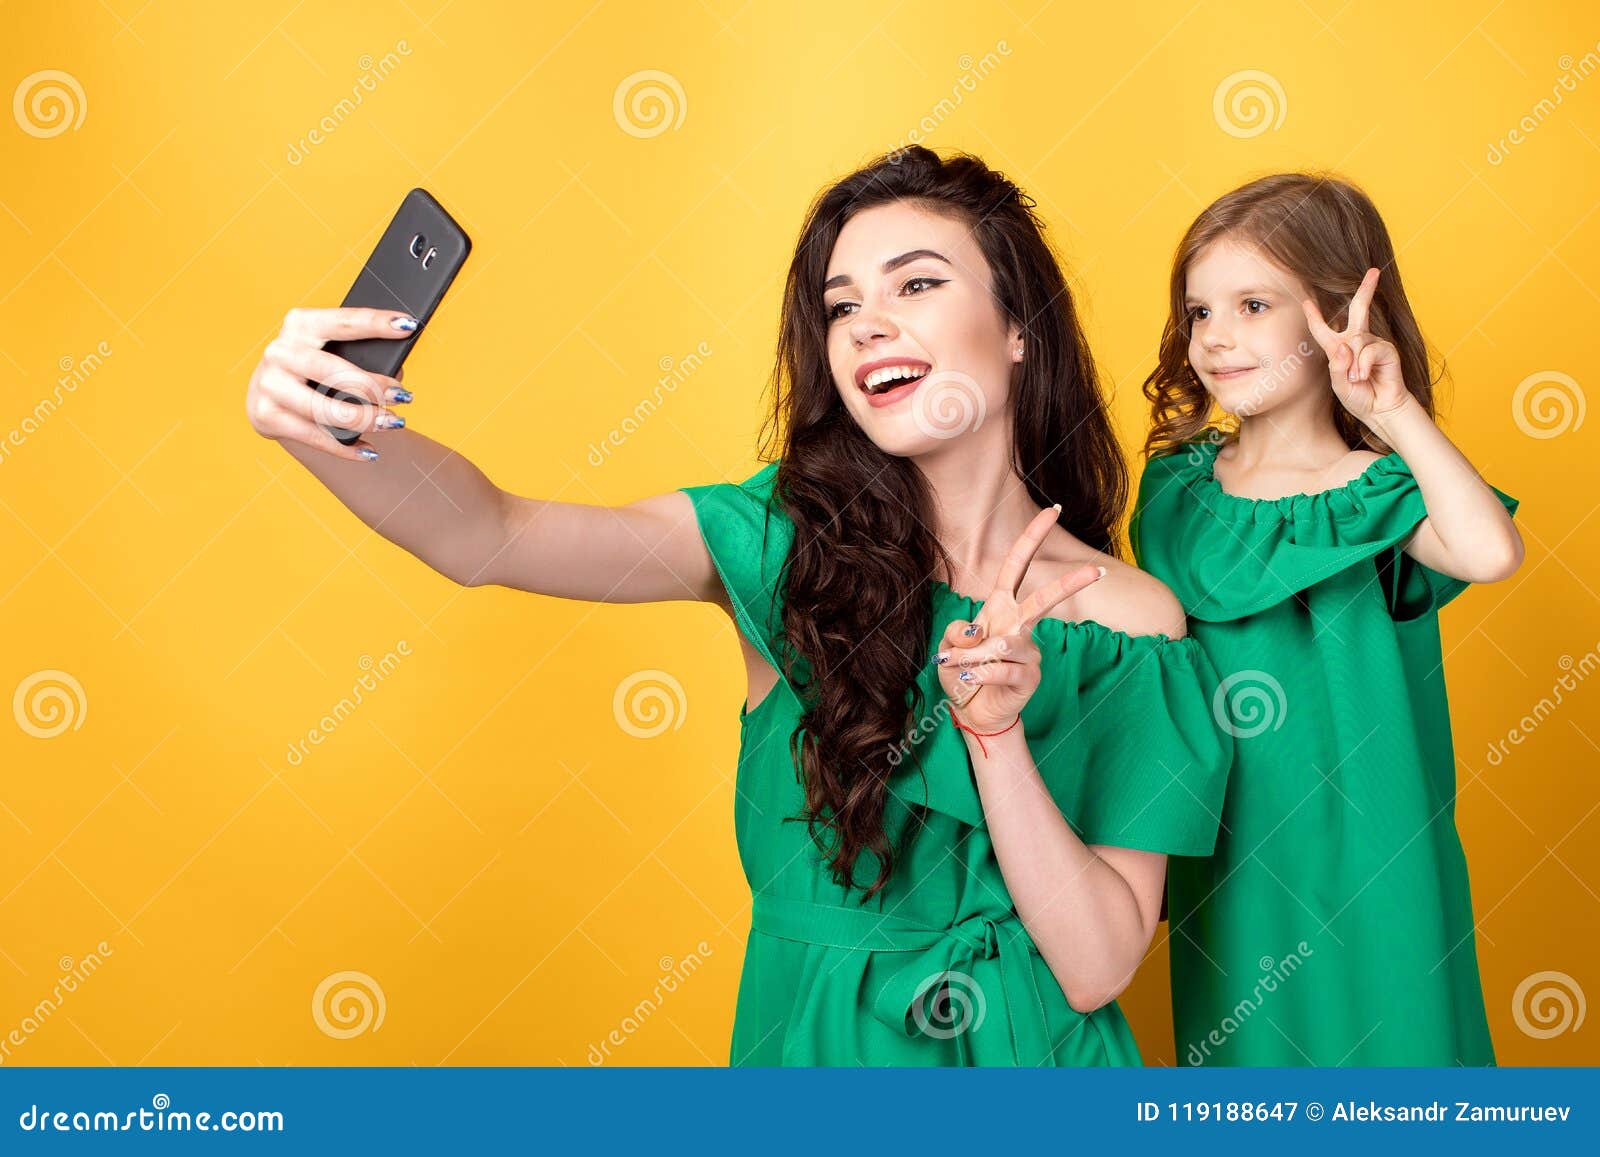 Awesome Mother with Daughter Taking Selfie Stock Image - Image of ...